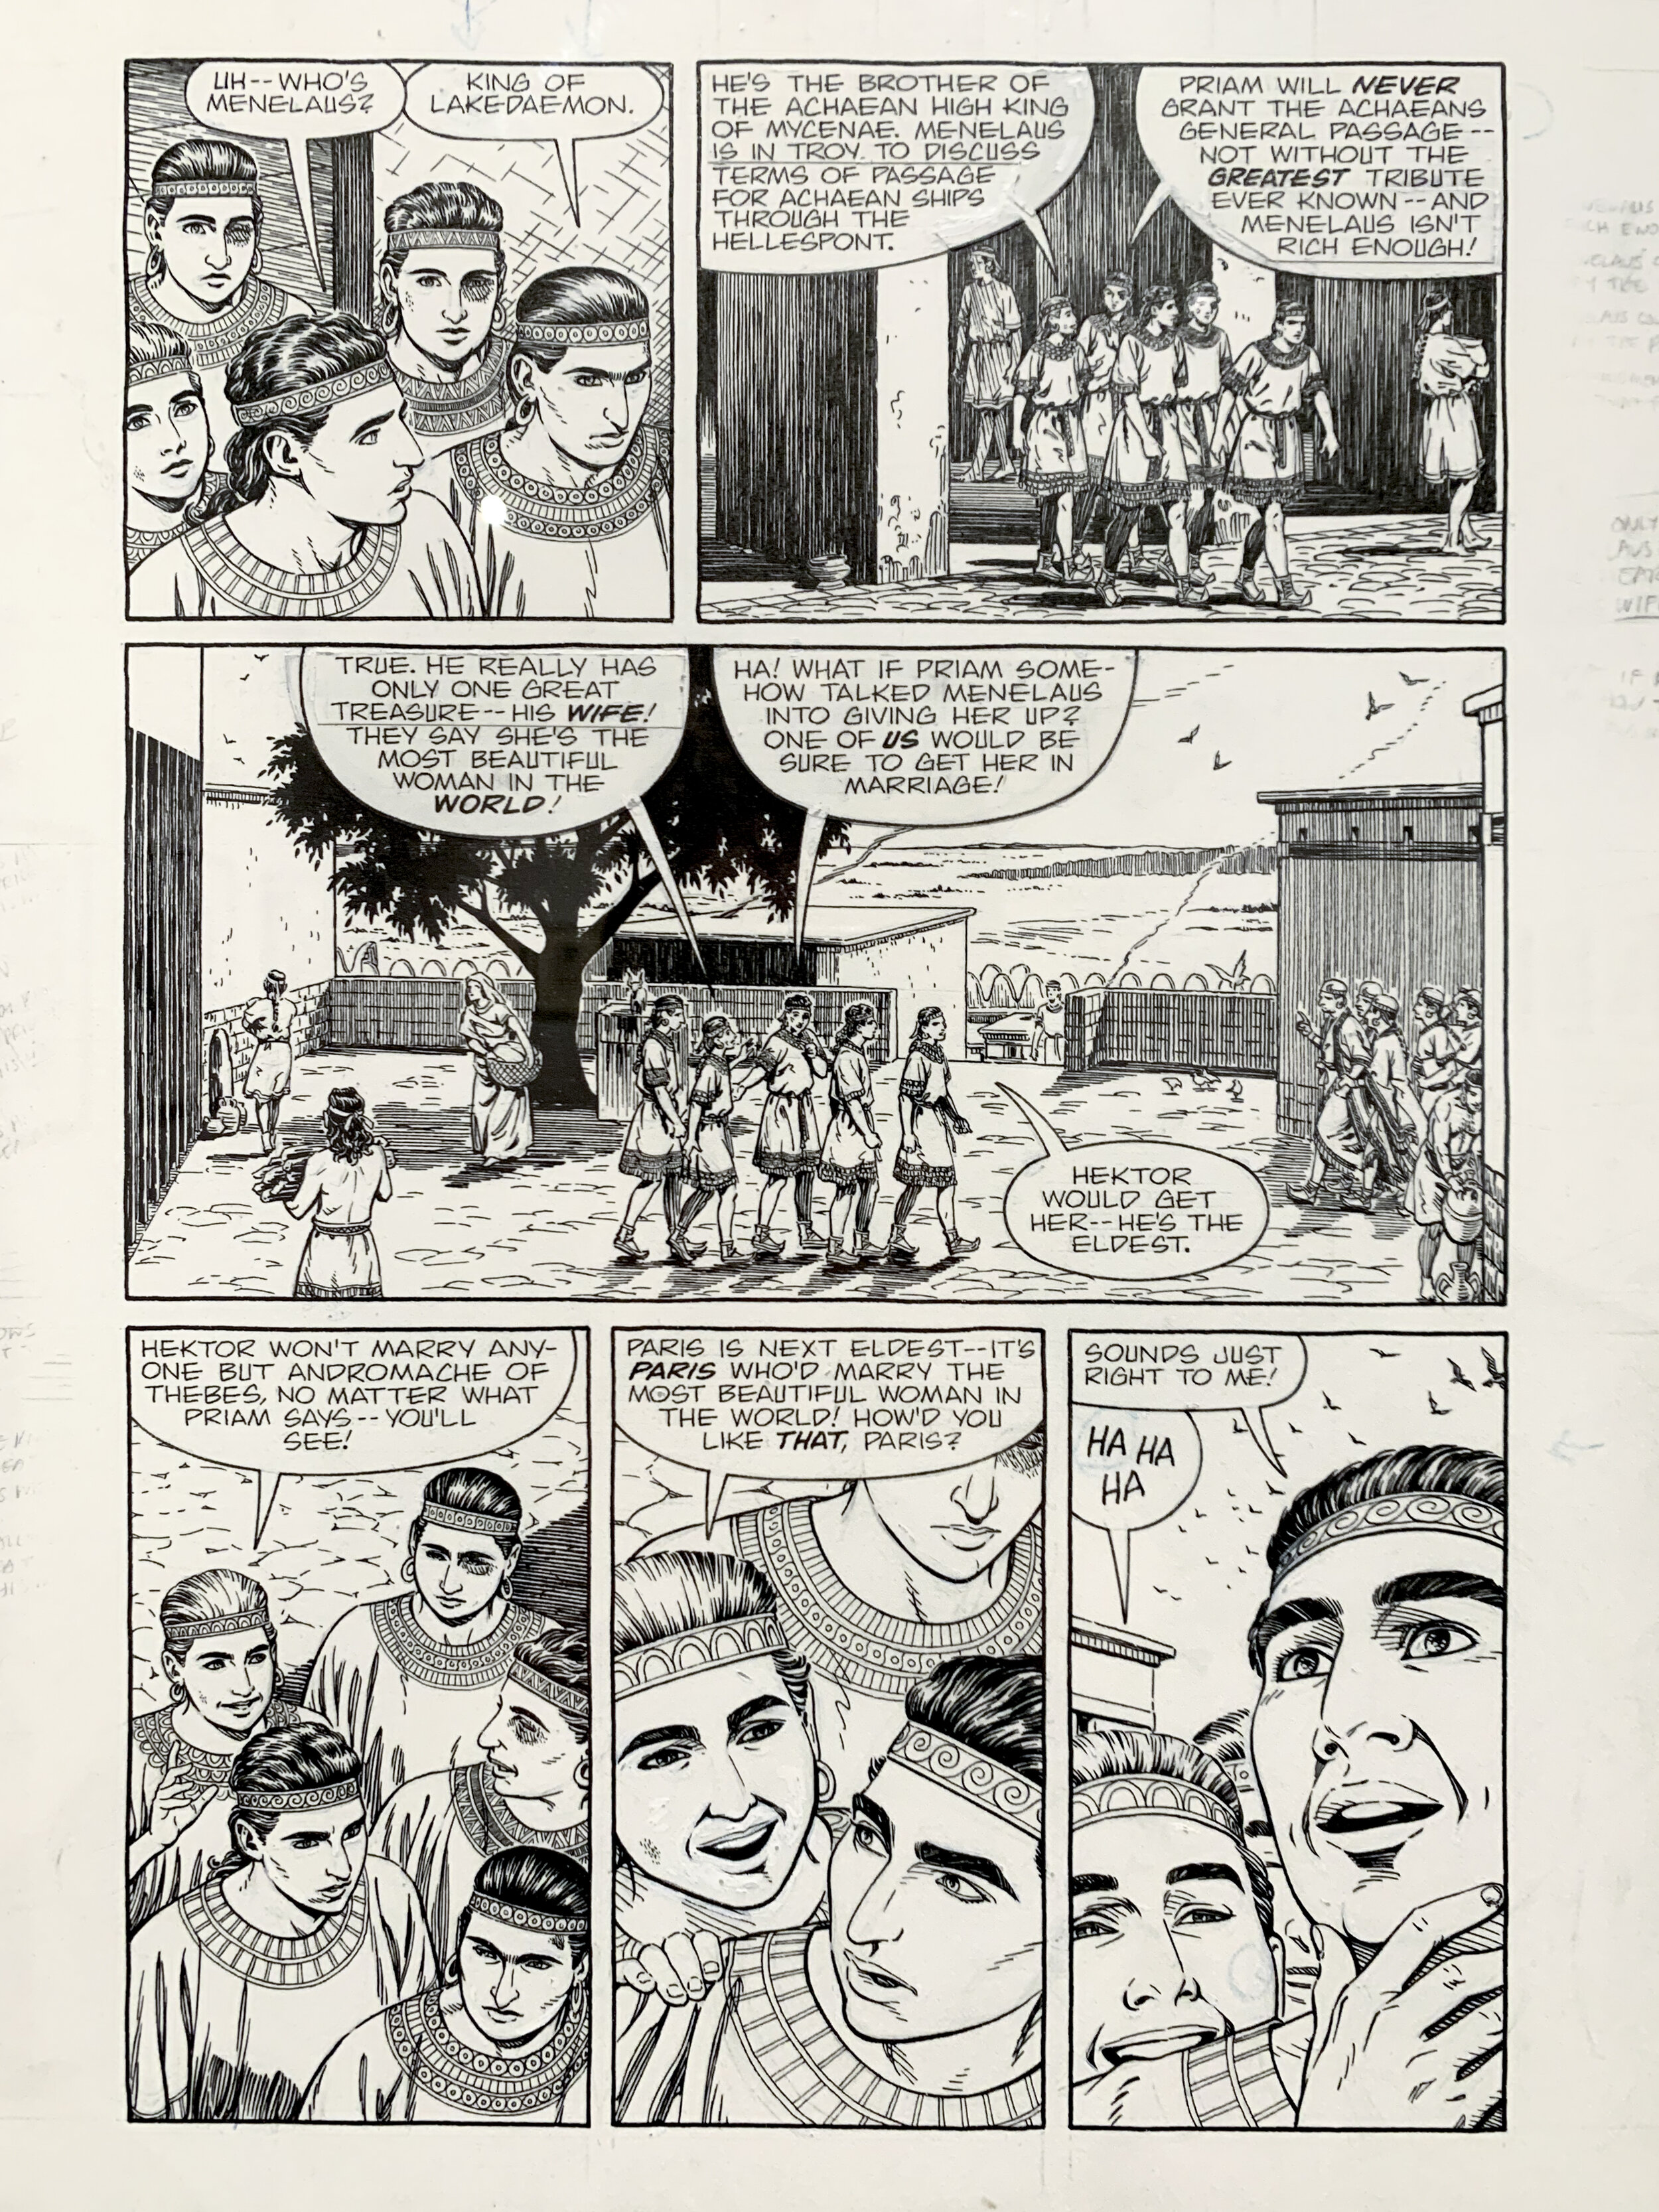   Eric Shanower    AGE OF BRONZE #2 (included in A THOUSAND SHIPS)    published by Image Comics, Jan 1999. pp 20, 1999  pen and india ink on Bristol board, notes in pencil 